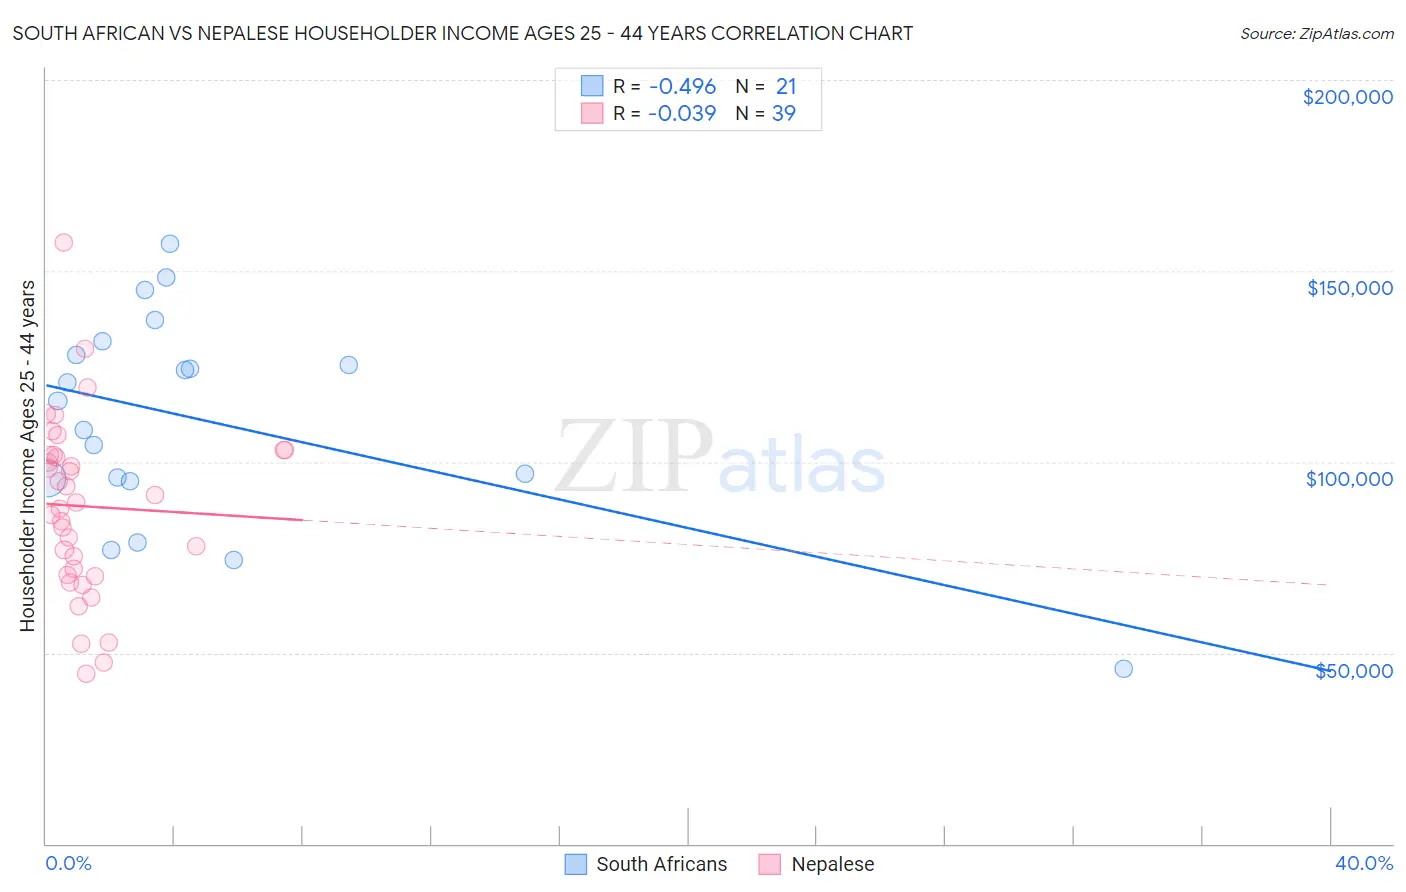 South African vs Nepalese Householder Income Ages 25 - 44 years